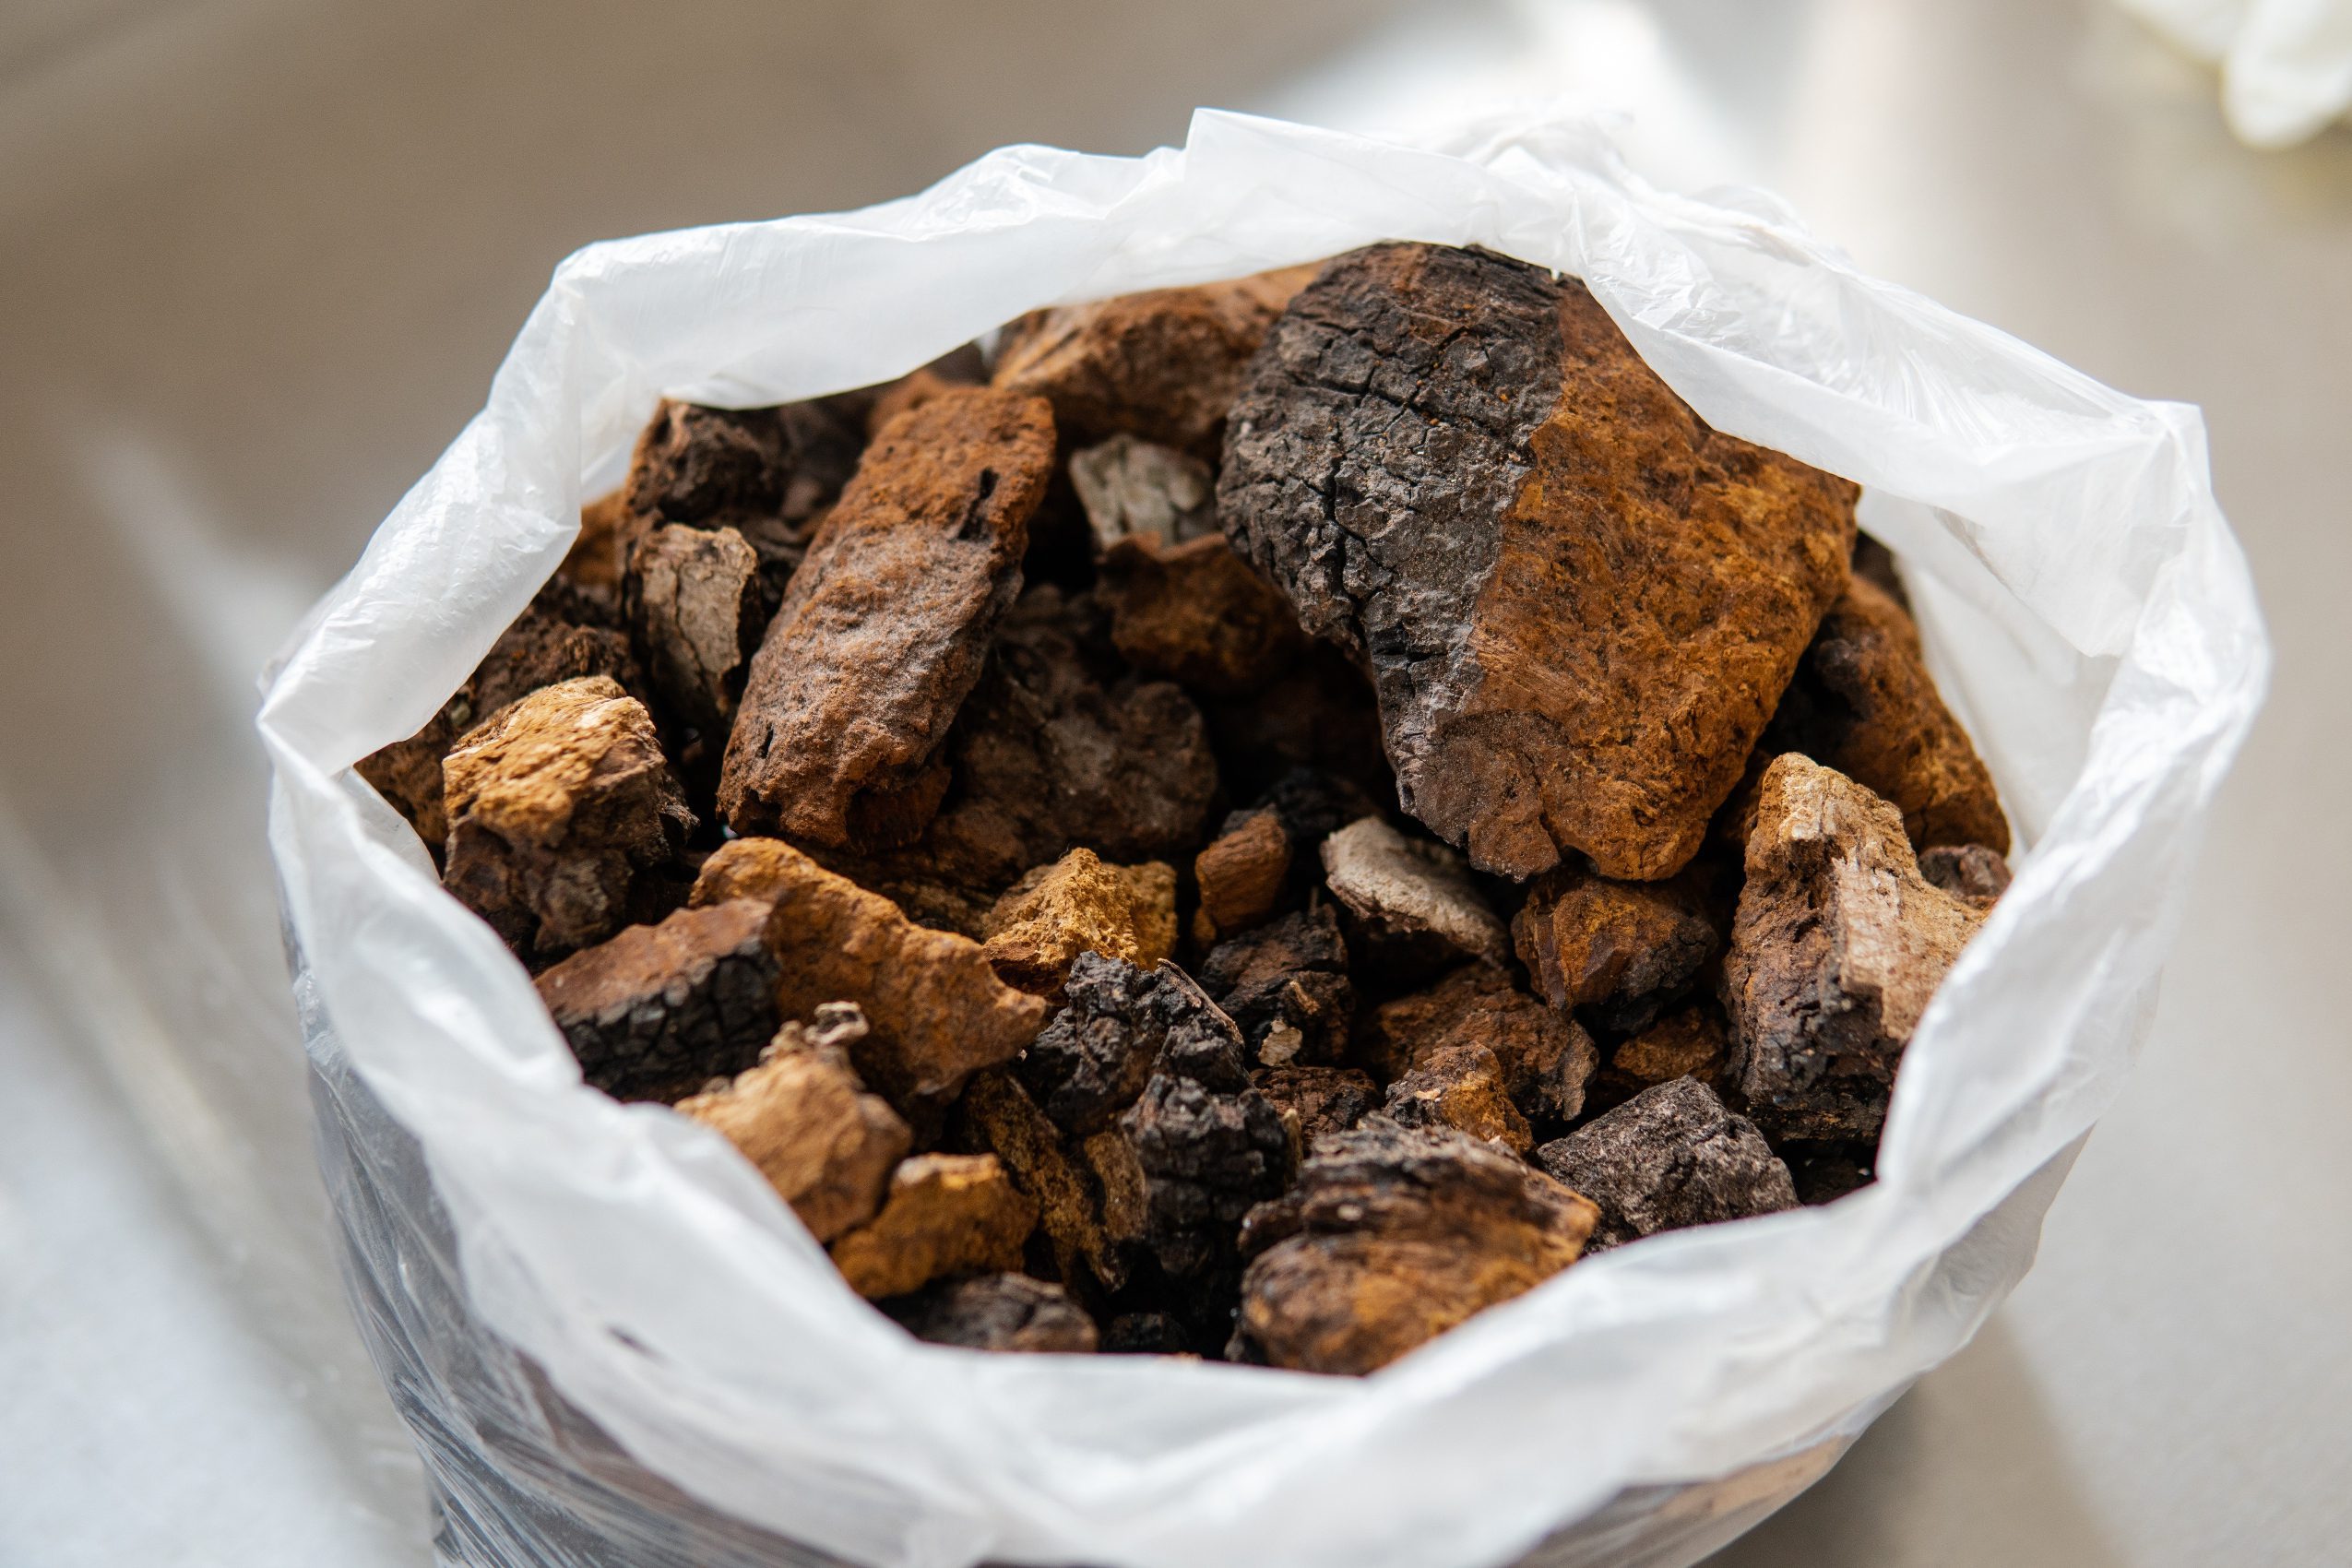 Chaga collected in white plastic bag